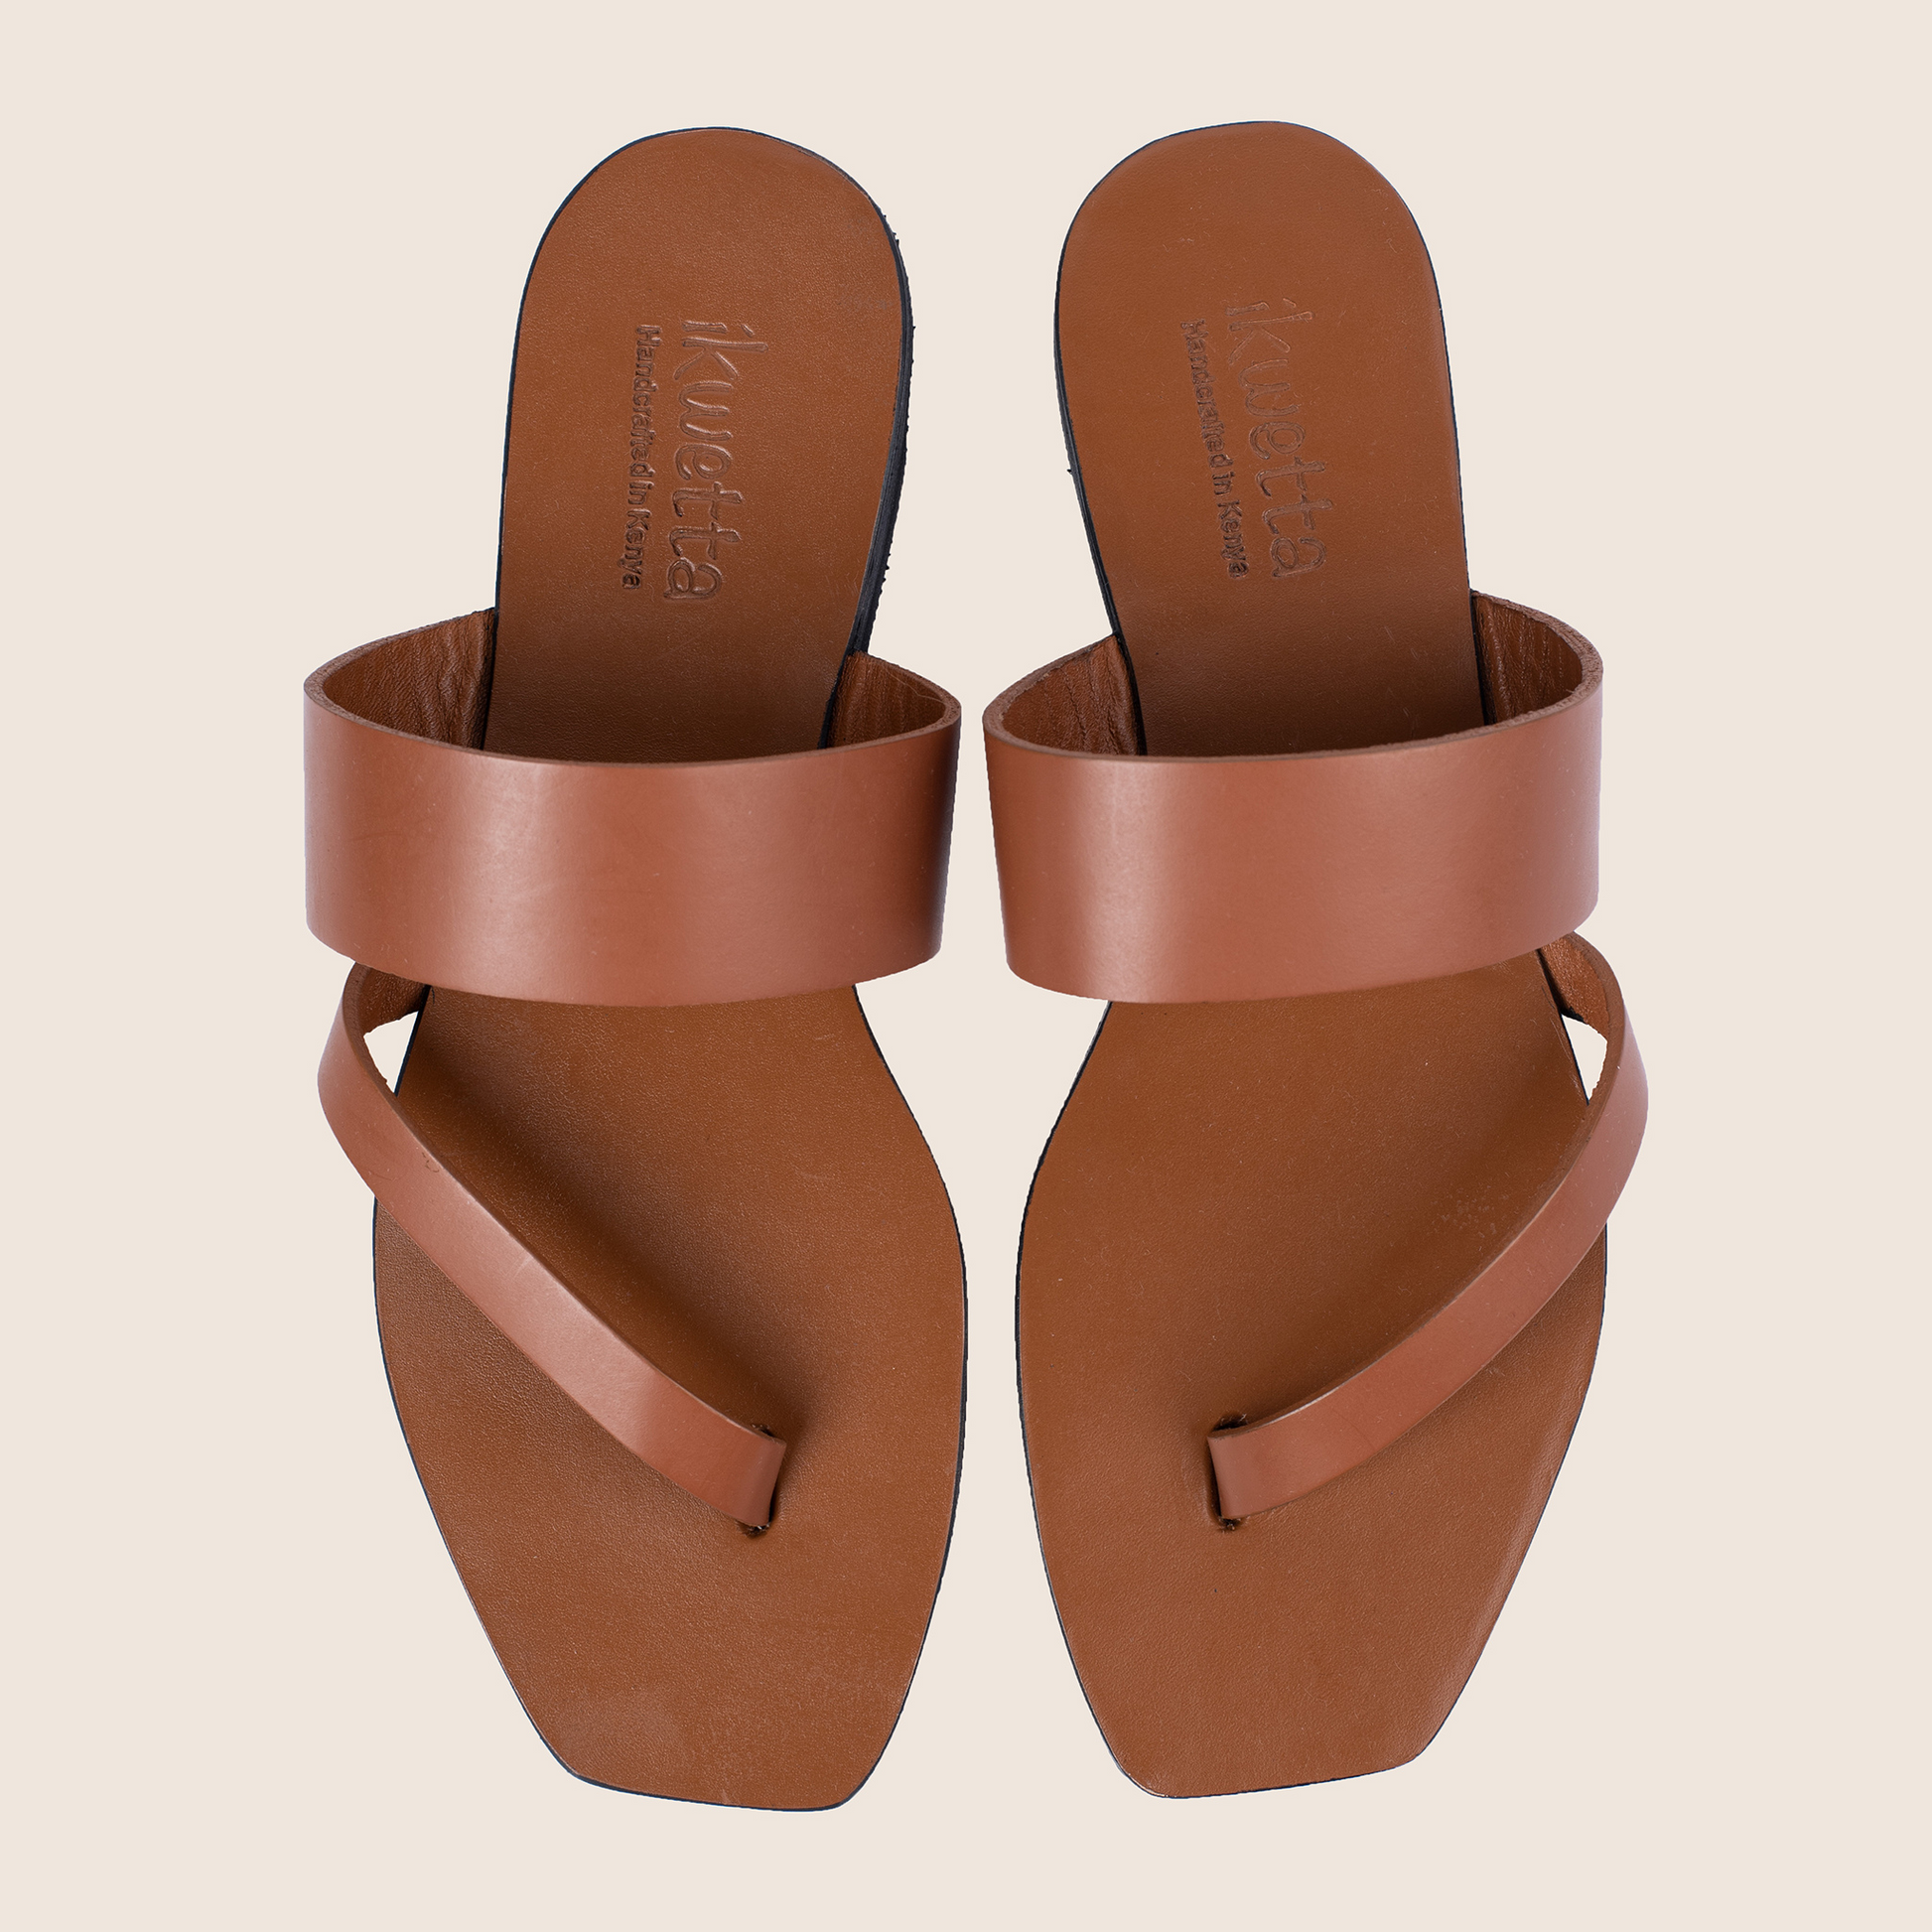 Tahiti sandals in caramel smooth leather and  leather sole